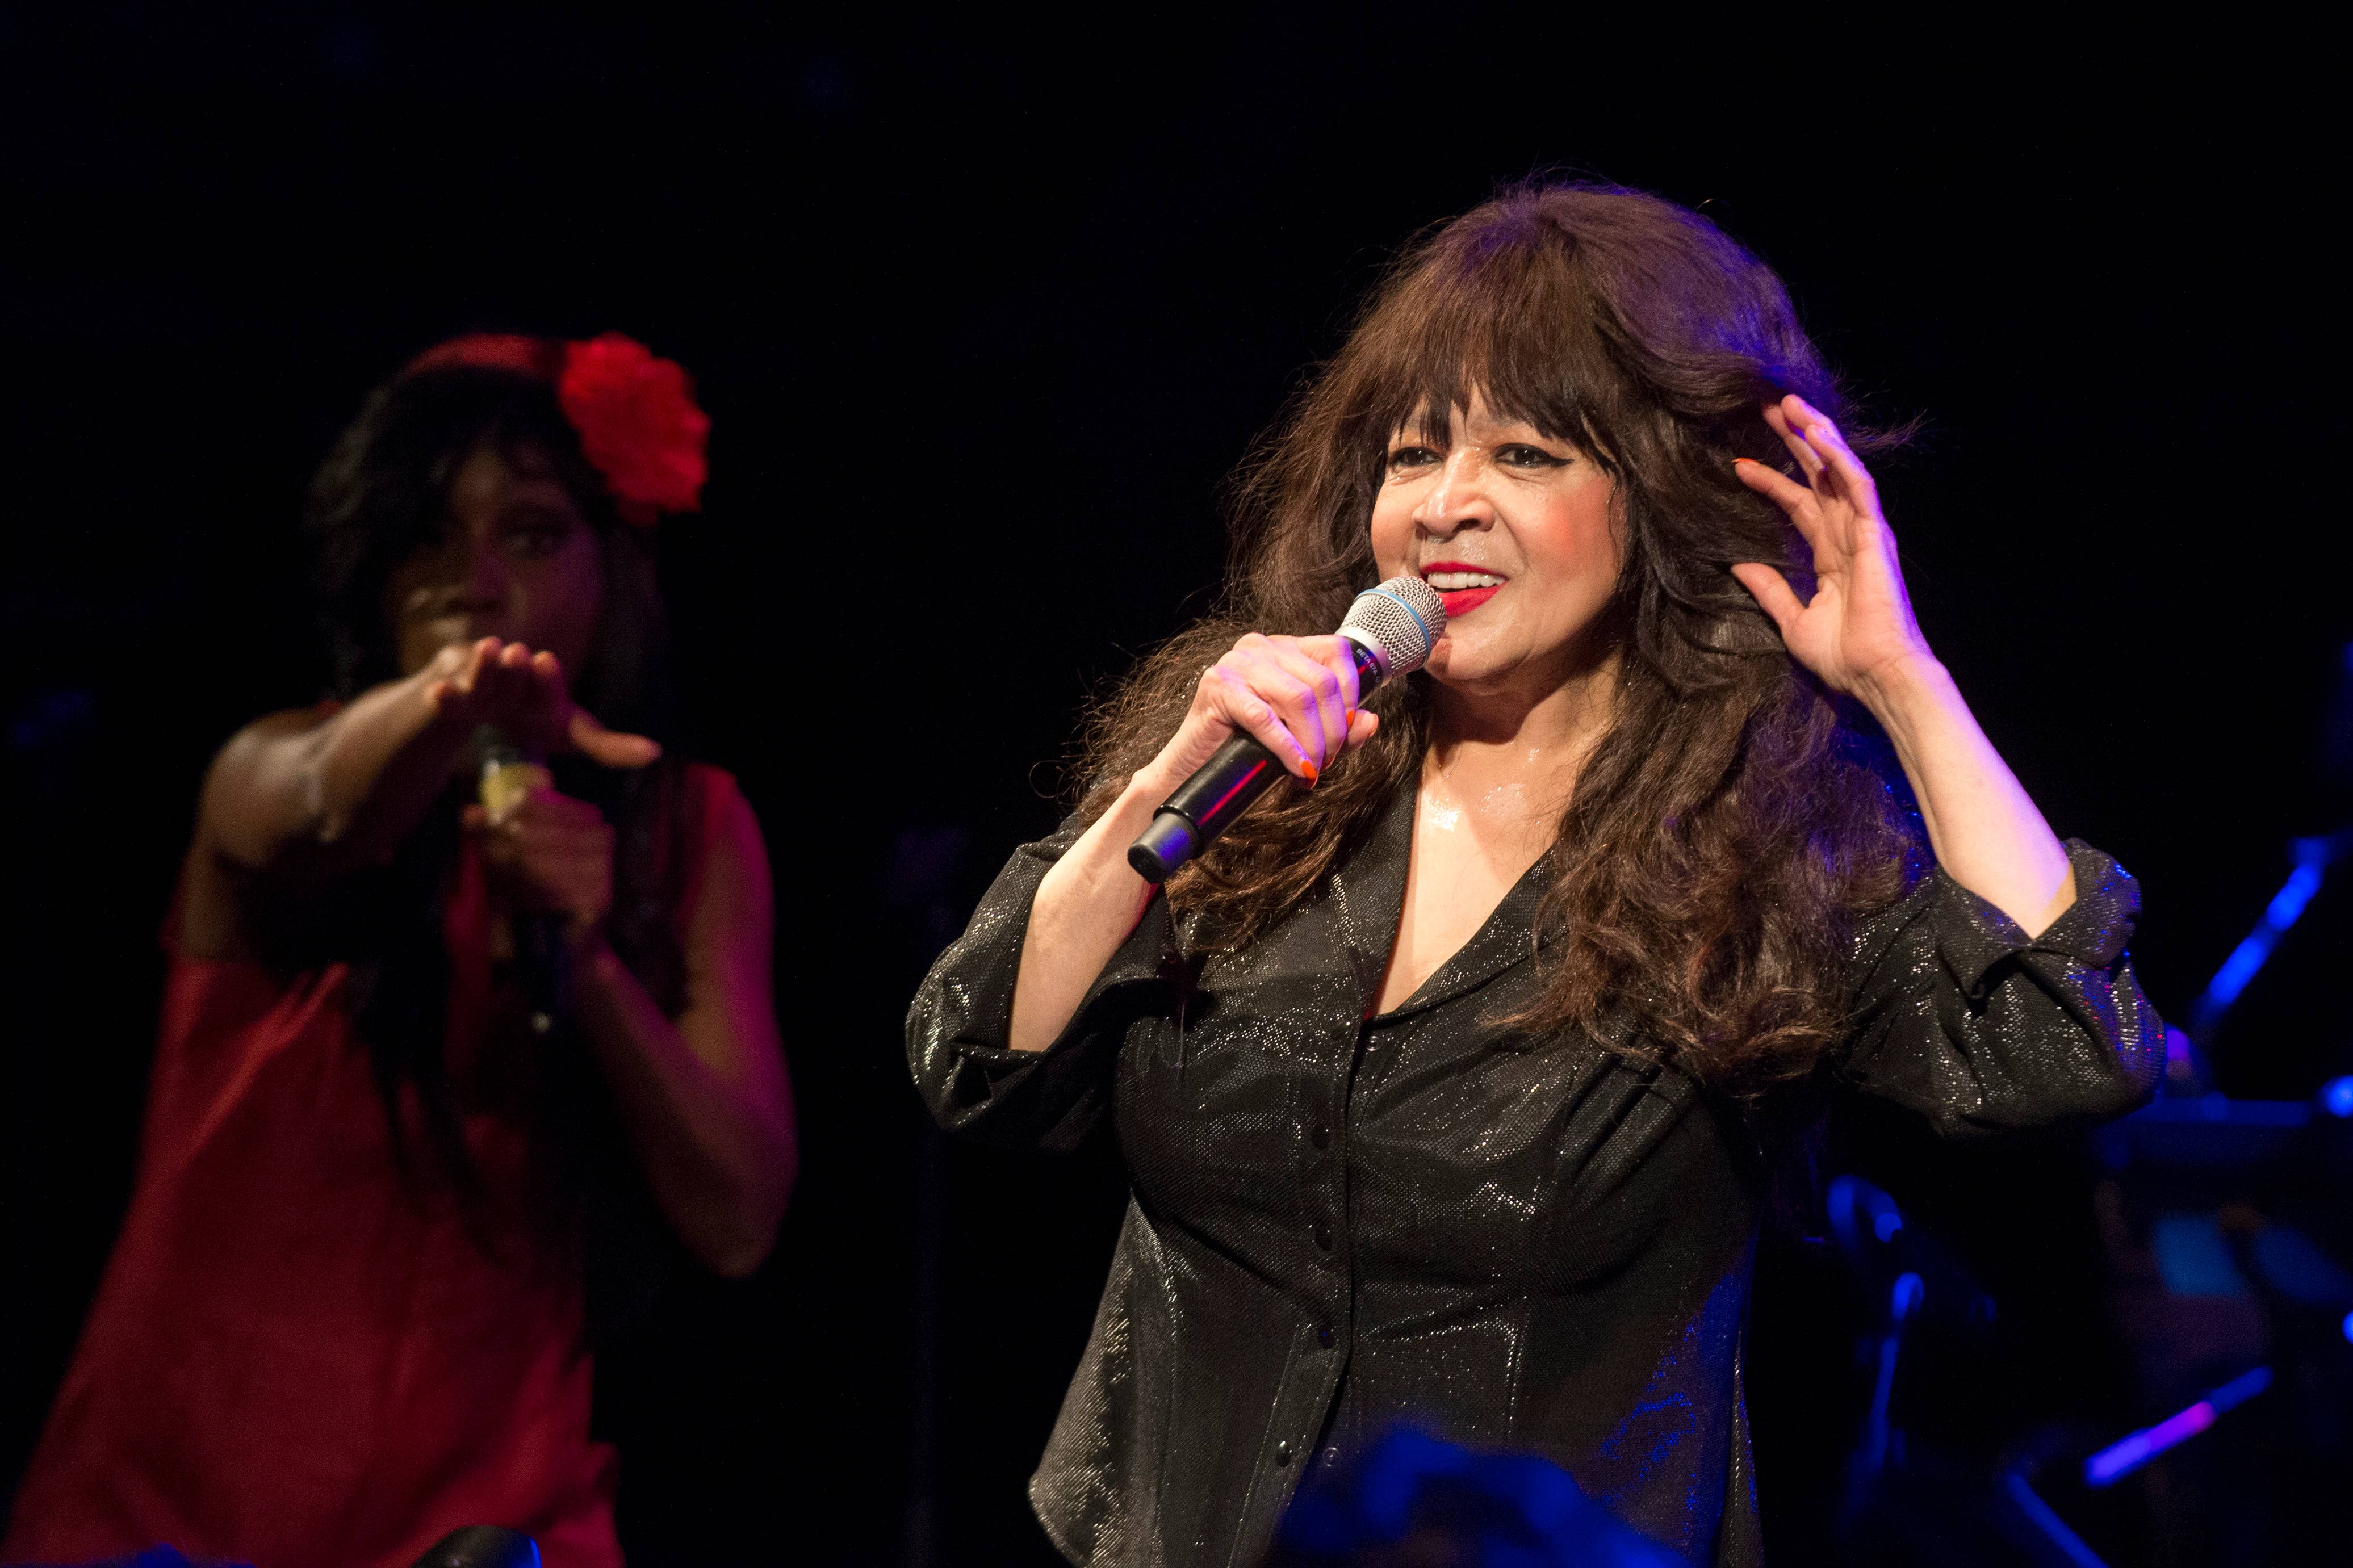 Ronnie Spector, lead singer of the Ronettes, dies at 78